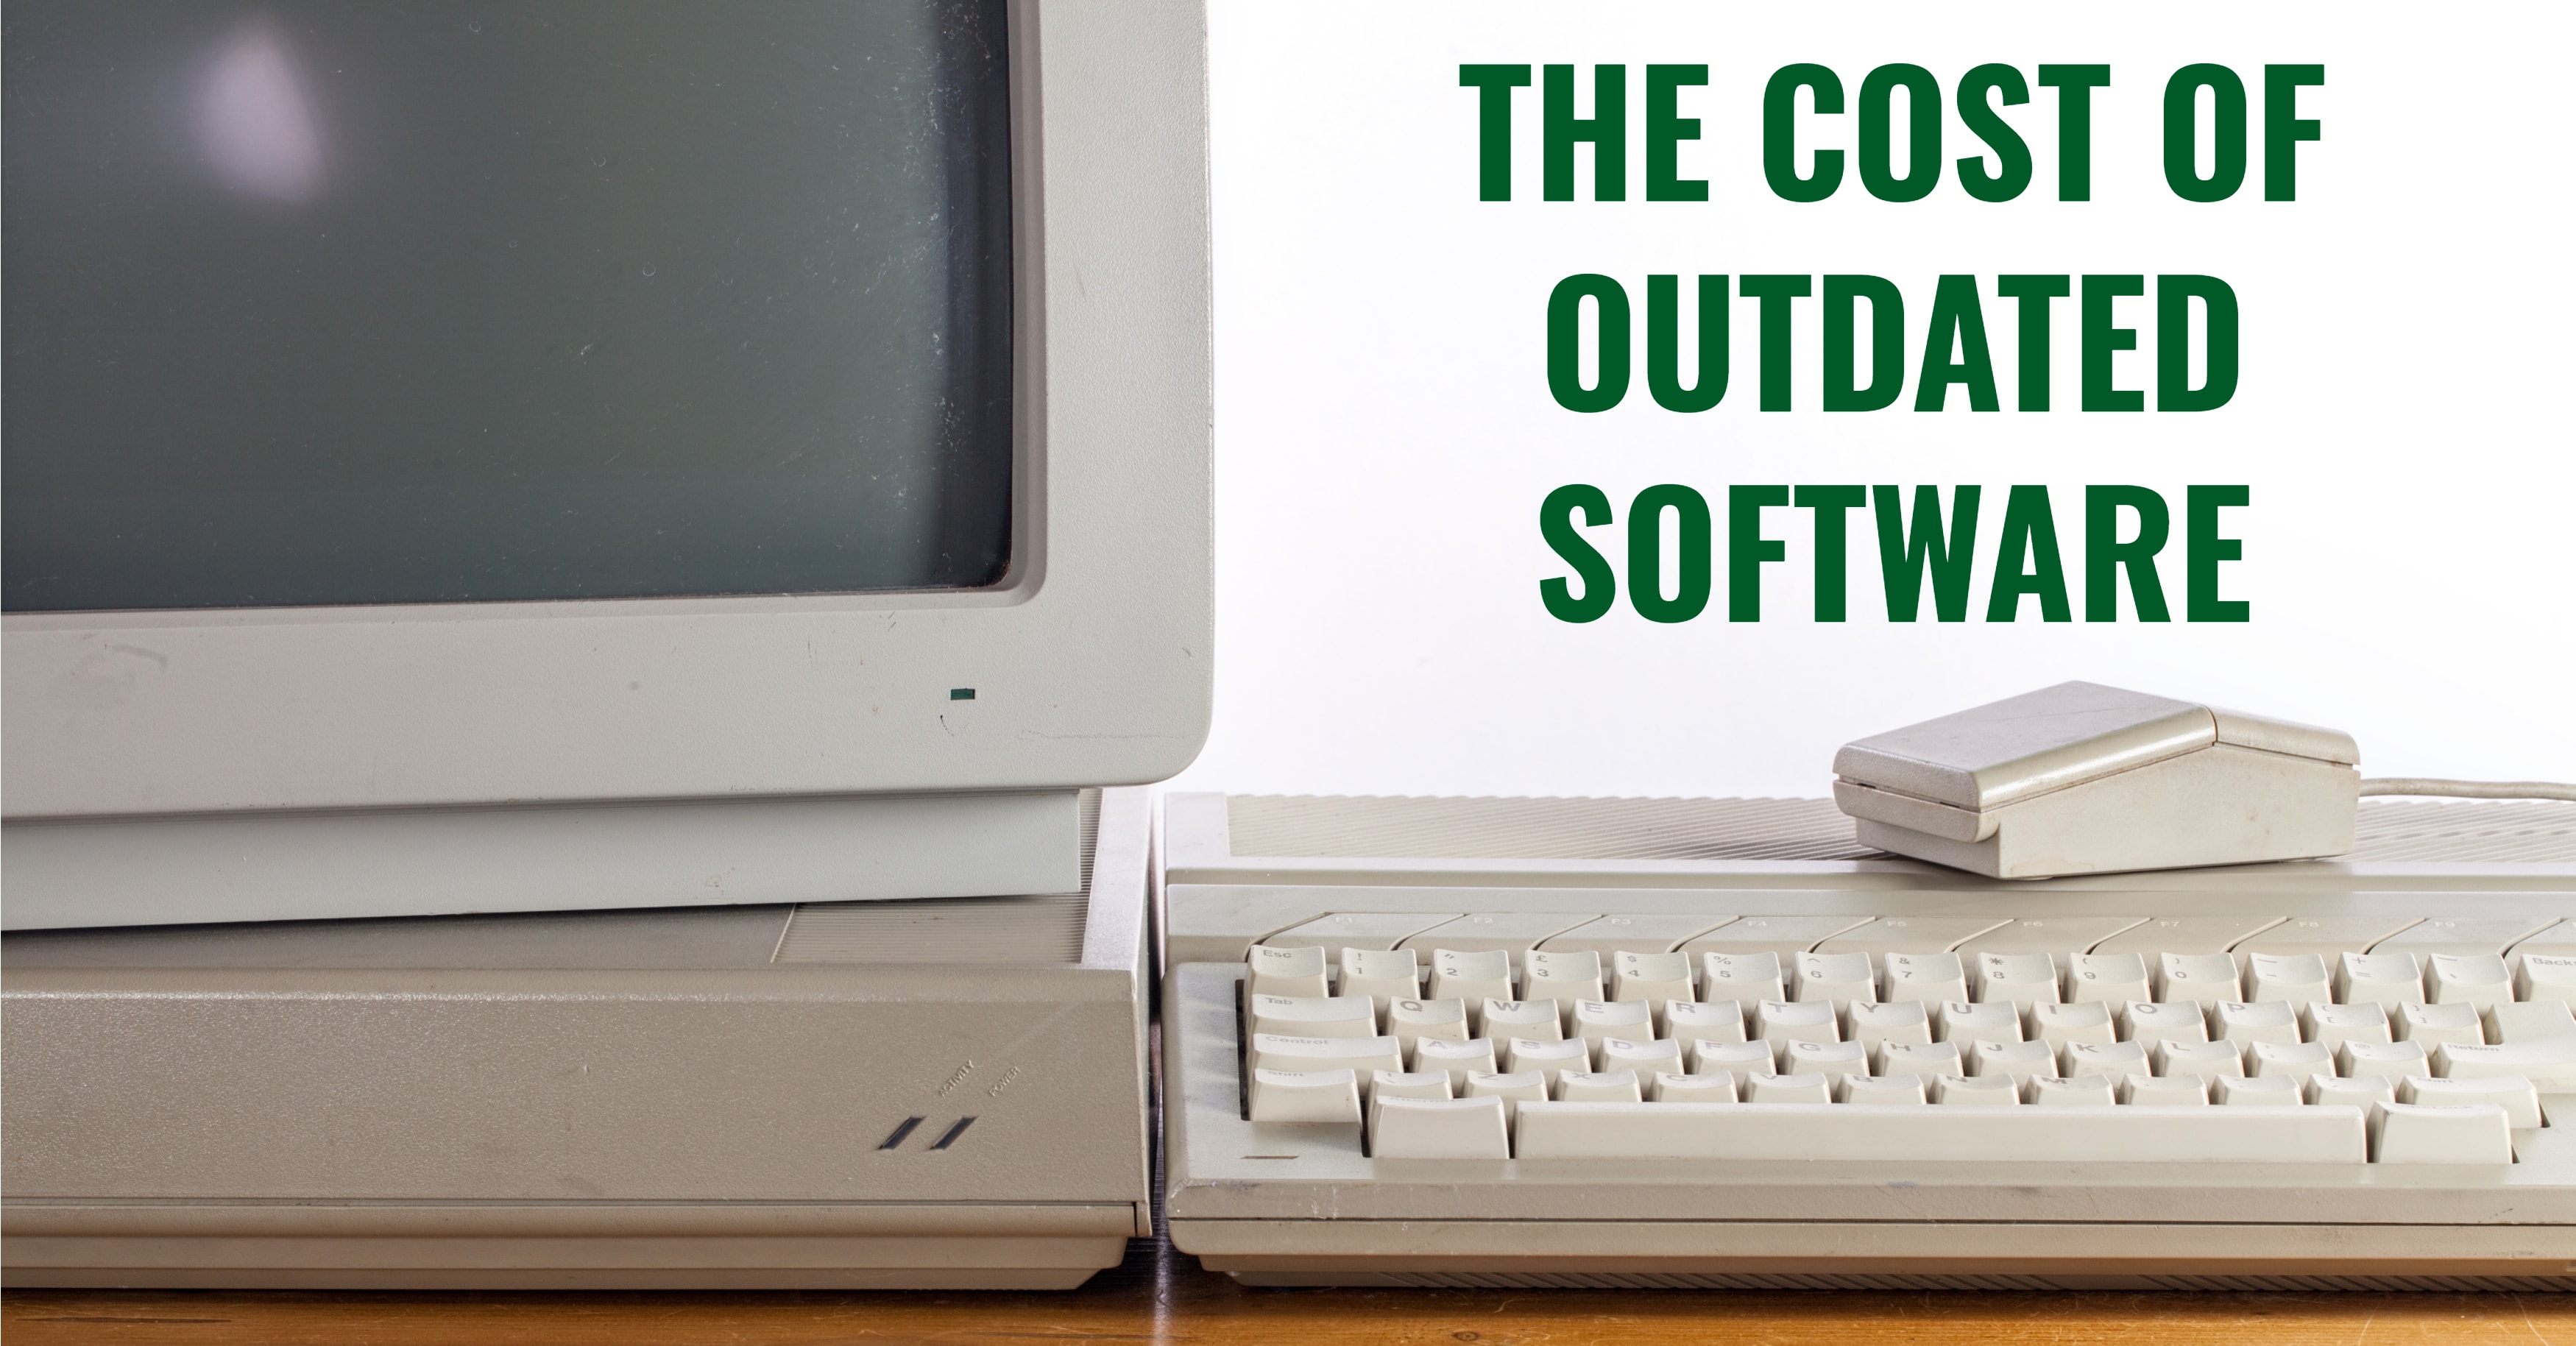 What's the Cost of Outdated Software?